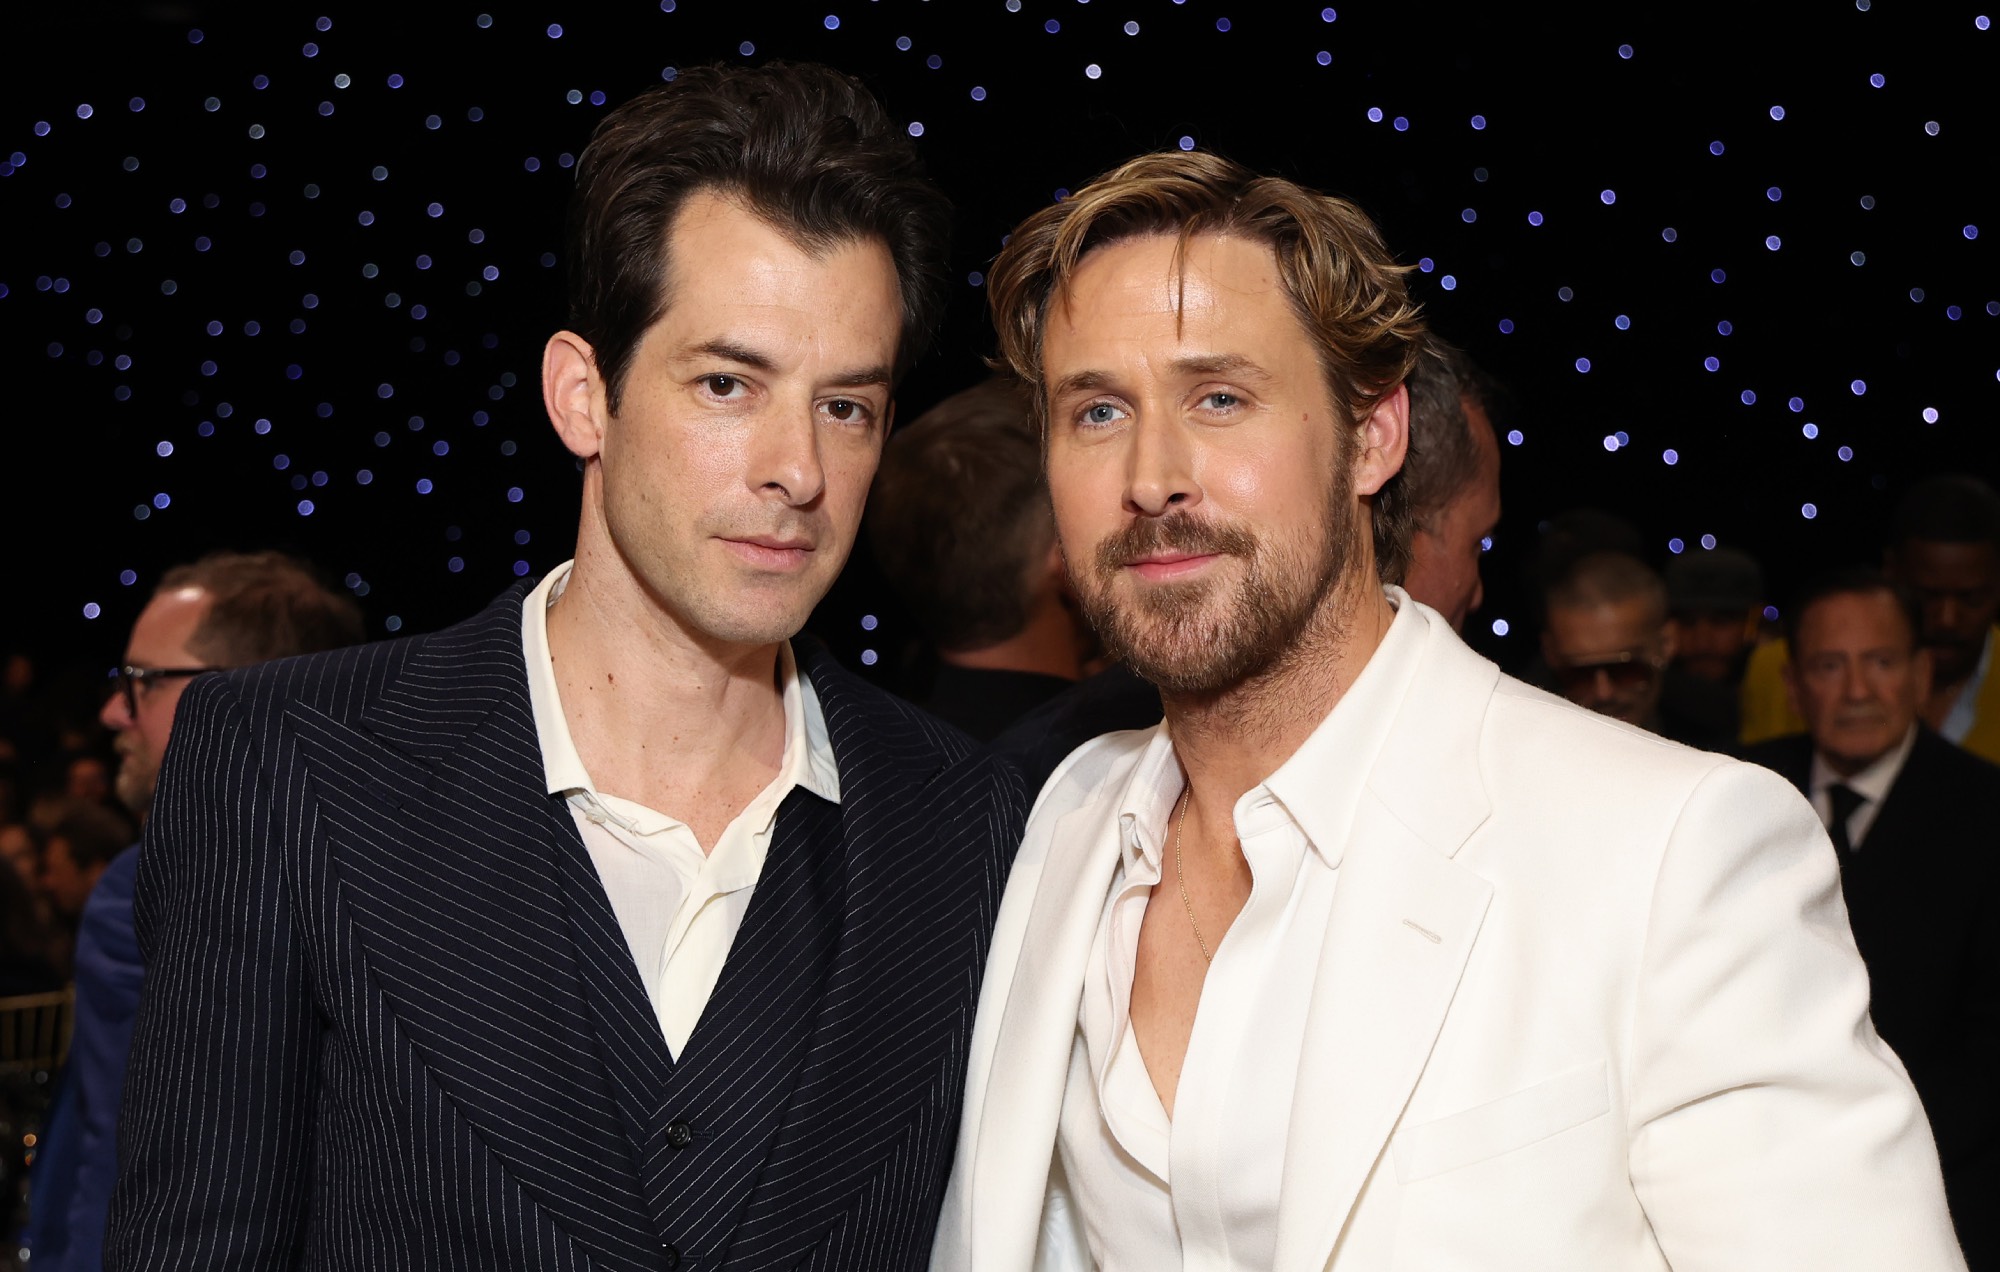 Mark Ronson “would love to make more music” with Ryan Gosling